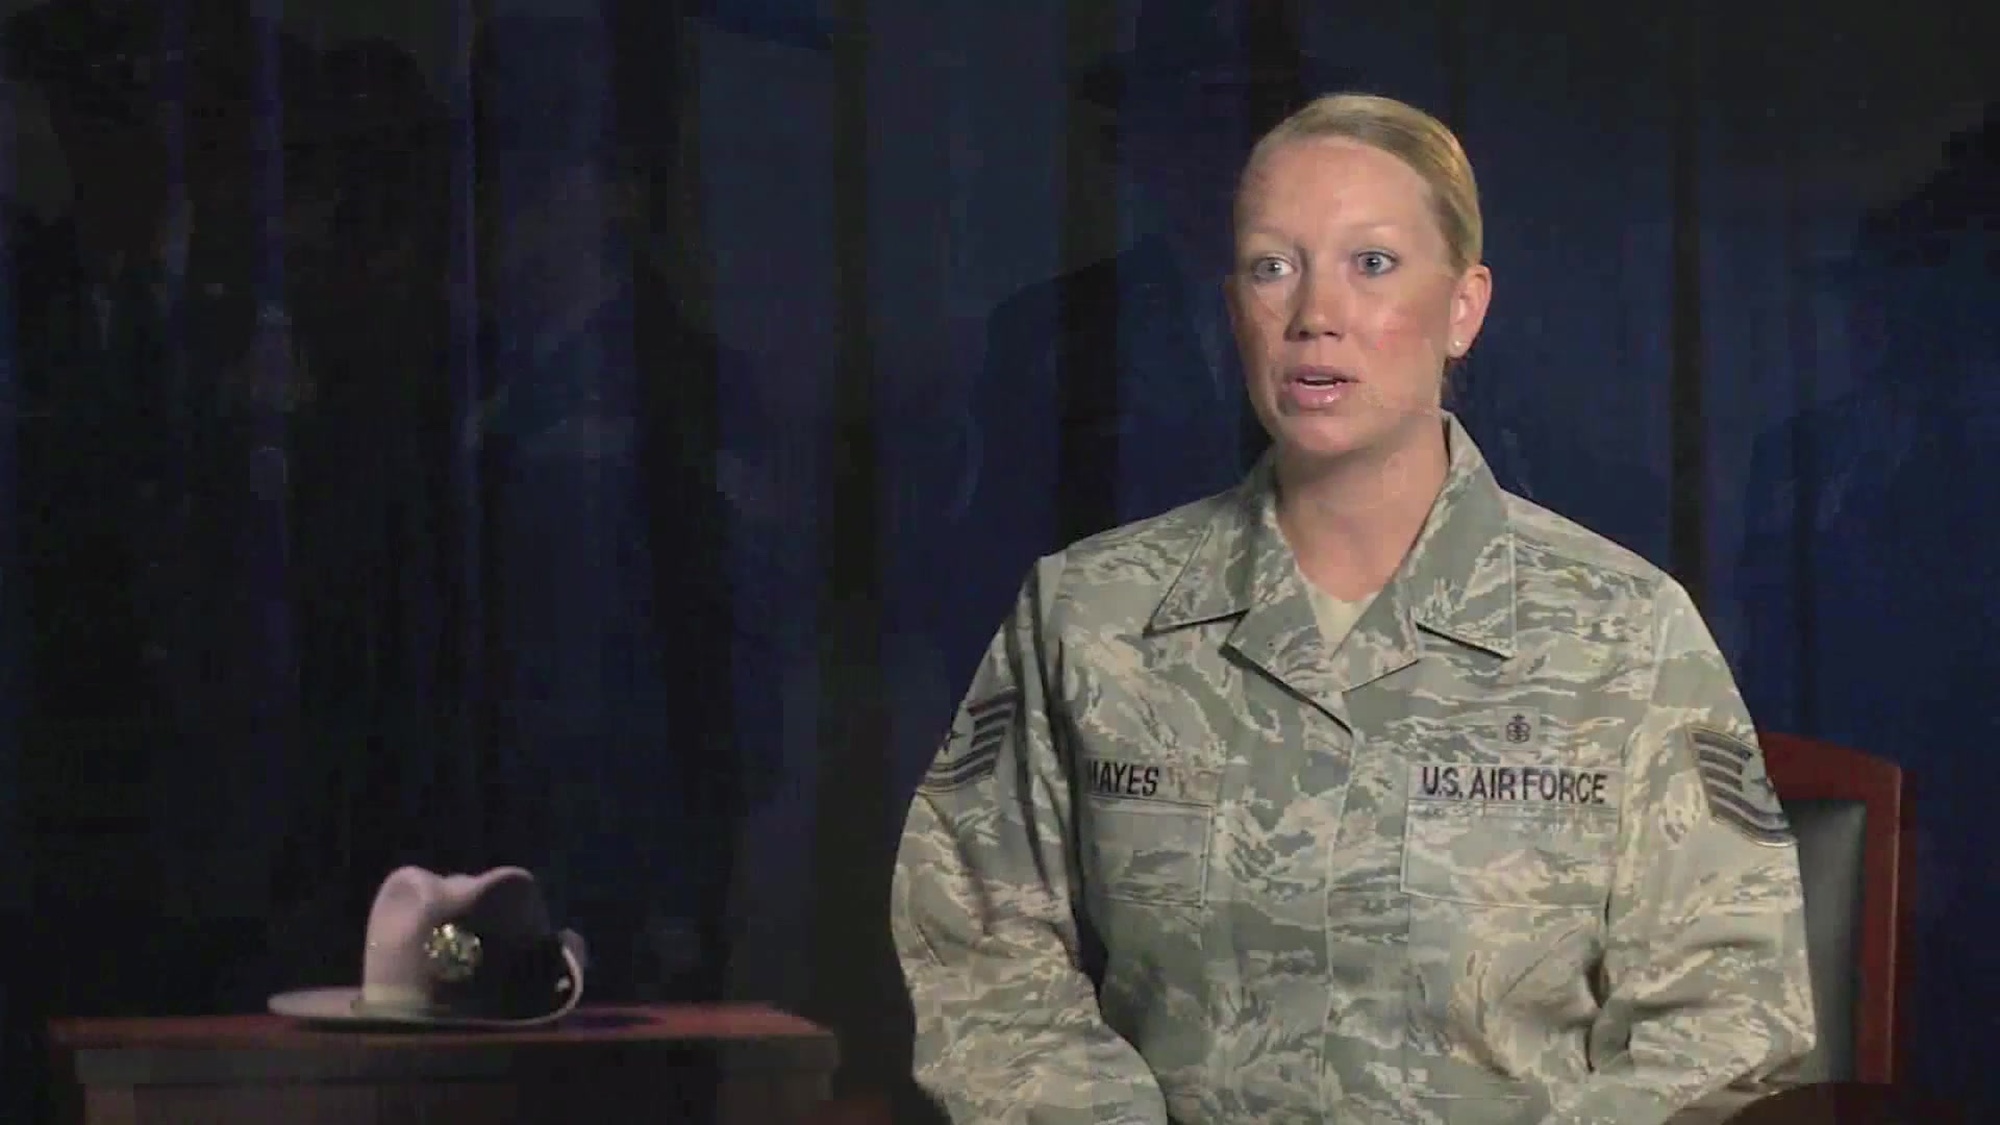 Professionalism is about learning to lead oneself; it’s not what you do, but how you do it!  It describes who we are as a service; how we conduct ourselves and live our lives.  In this video TSgt Hayes, a Basic Military Training Instructor, tells her personal story of how she led herself, guided by Air Force Core Values and her personal commitment, to become the successful Airman and leader she is today.  She talks about her adversity; her leaders in the past who created an environment of trust, loyalty, dignity and commitment that molded her into who she is; and how this made her want to become a Military Training Instructor so that she could mold our Airmen into Airmen who will embody Air Force core values and create the same type of environment when they become  leaders.  (Roadmap Alignment 2.1.2)